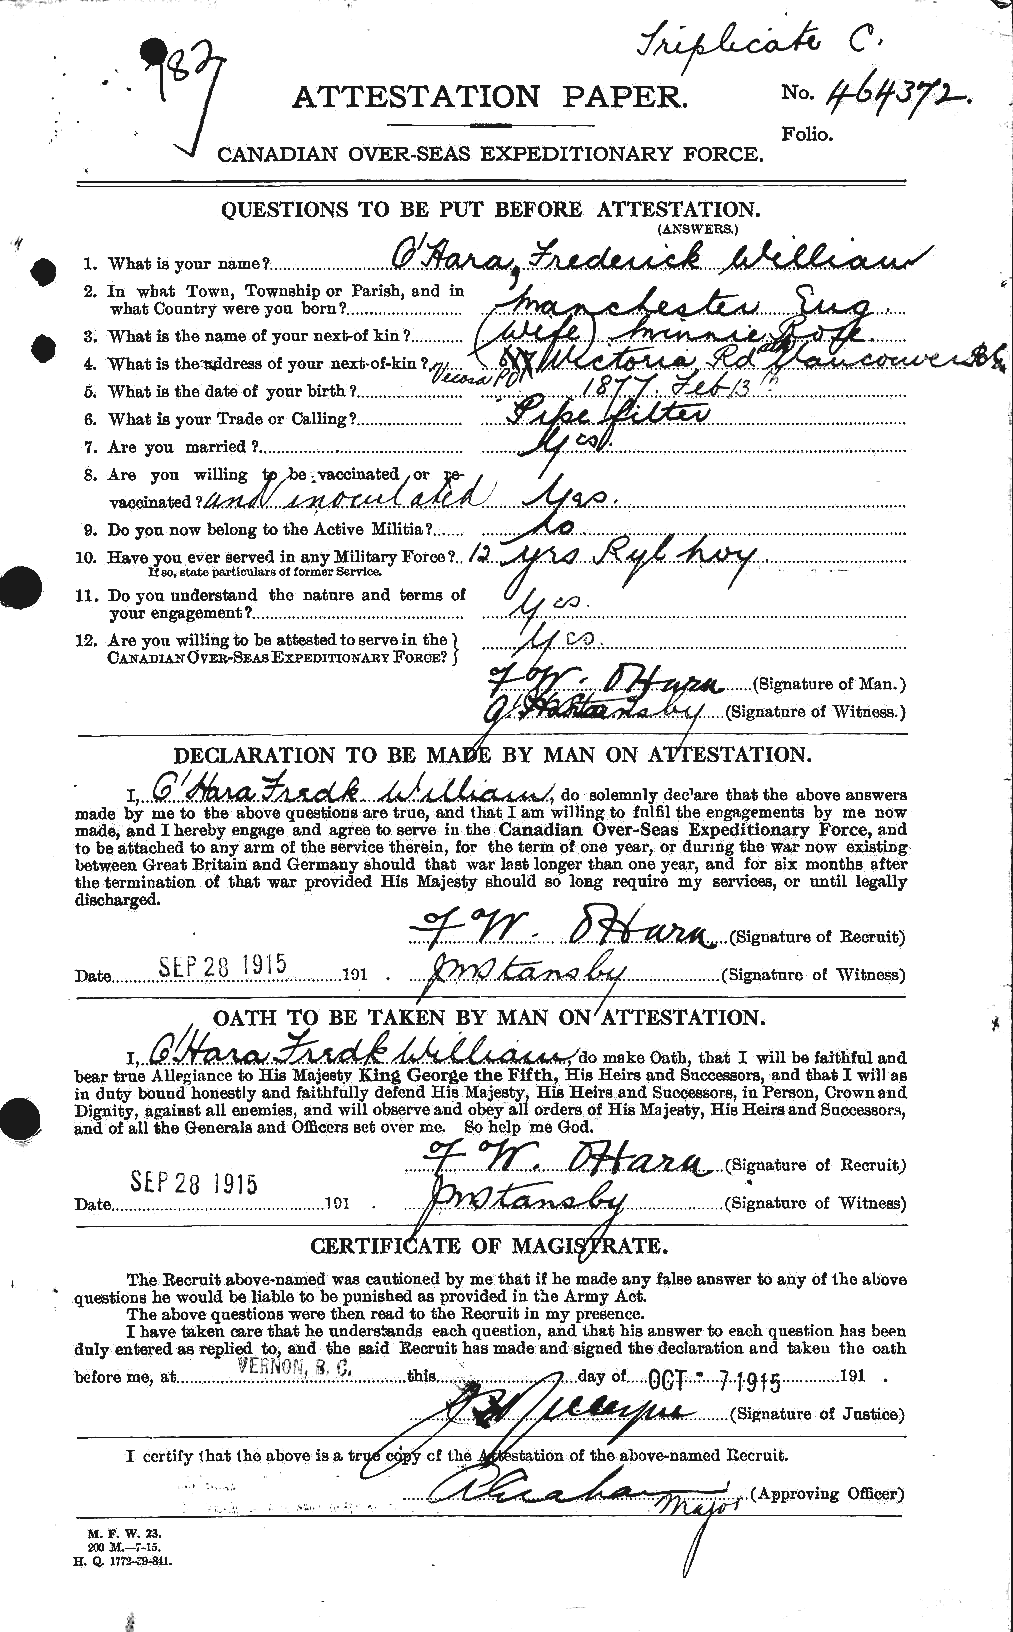 Personnel Records of the First World War - CEF 551470a